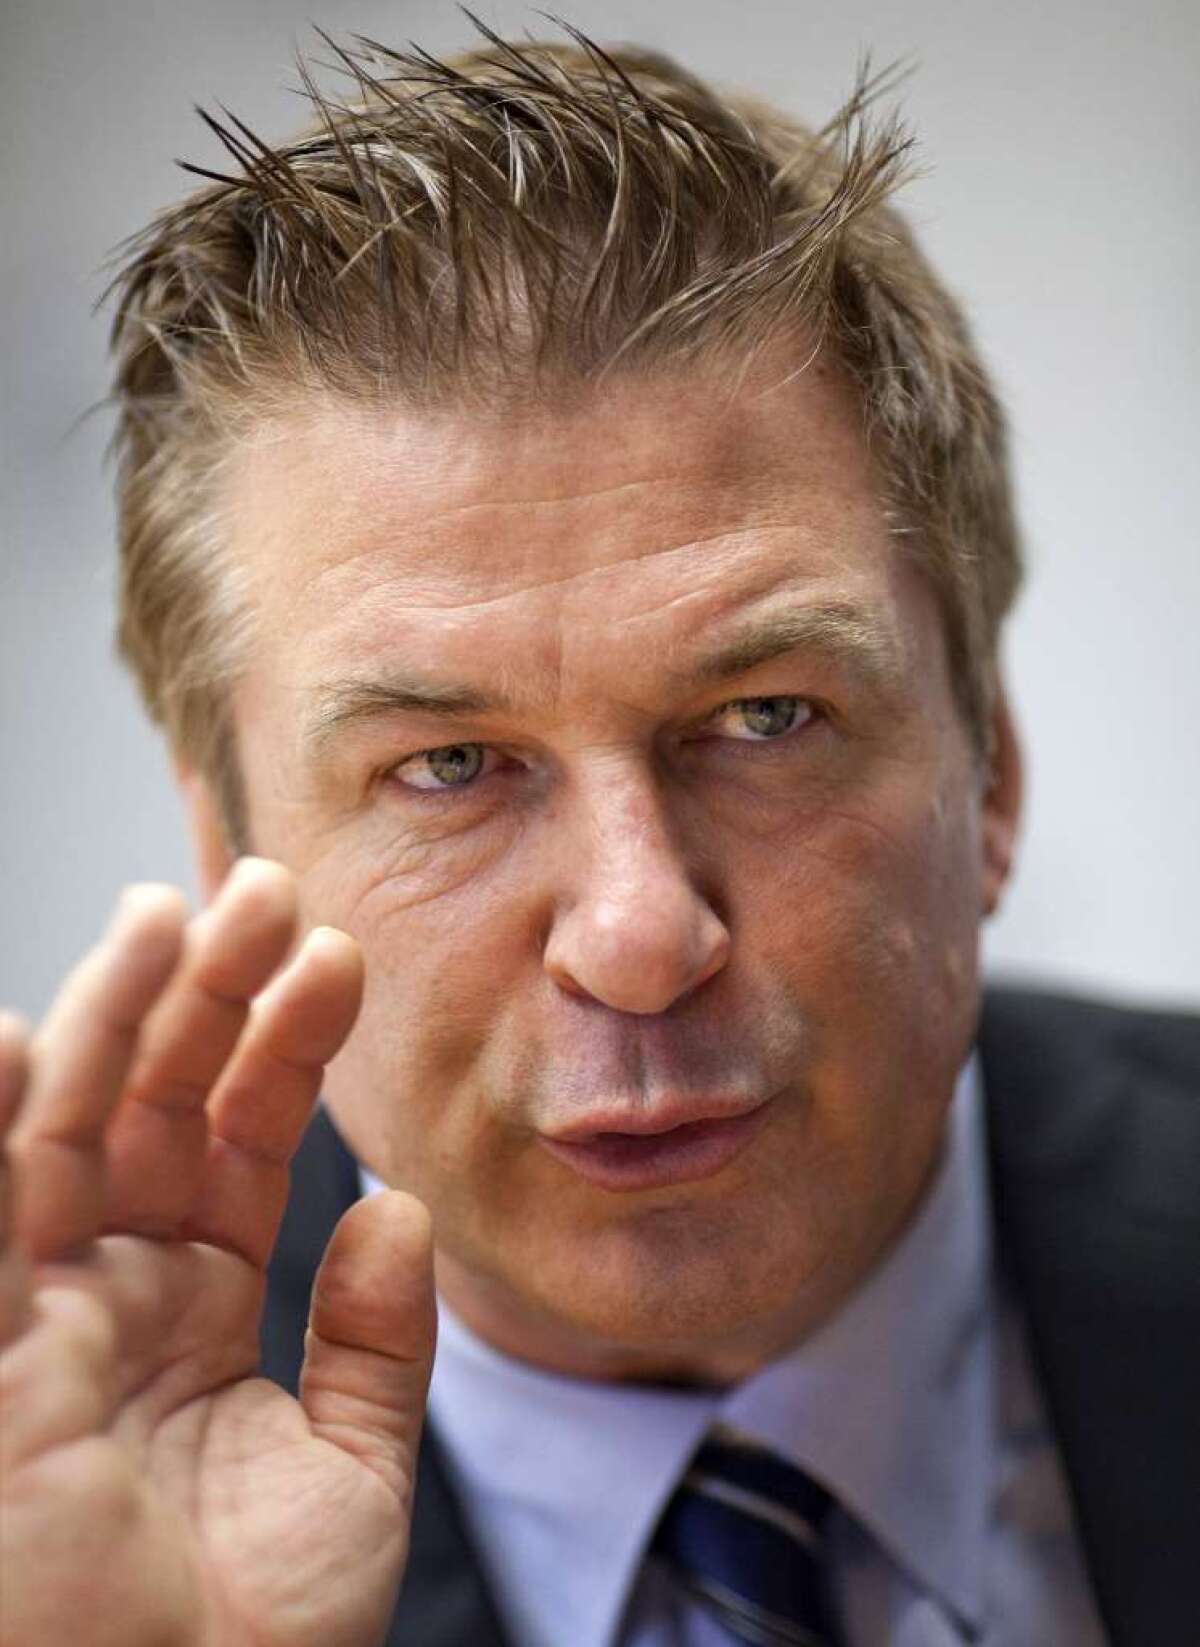 Alec Baldwin will resume his role as an arts advocate in Washington, D.C. He'll introduce keynote speaker Maureen Dowd on Arts Advocacy Day in March, reversing their 2012 roles when she introduced him.